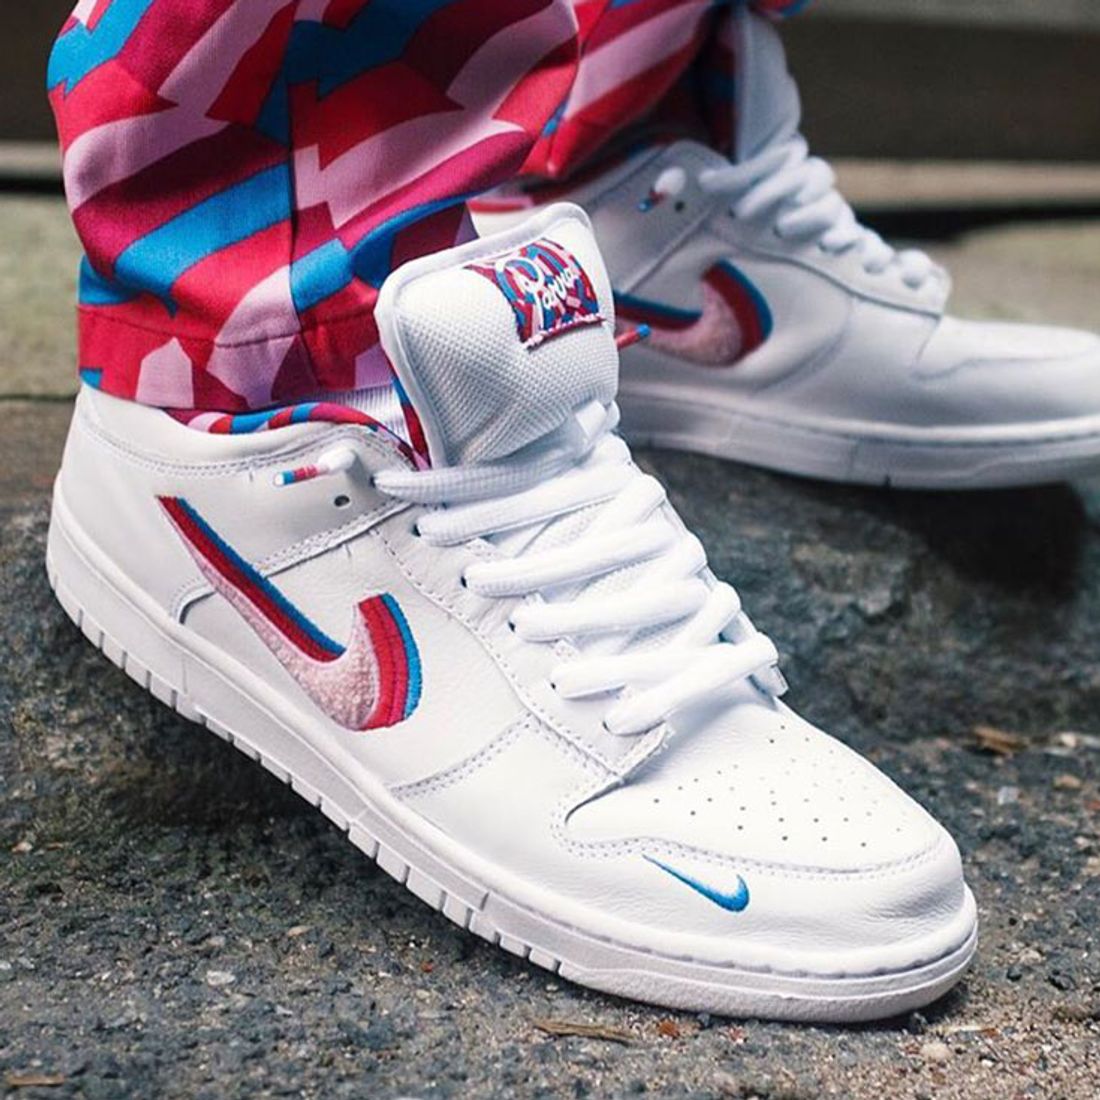 Here's How People are Styling the Parra x Nike SB - Freaker